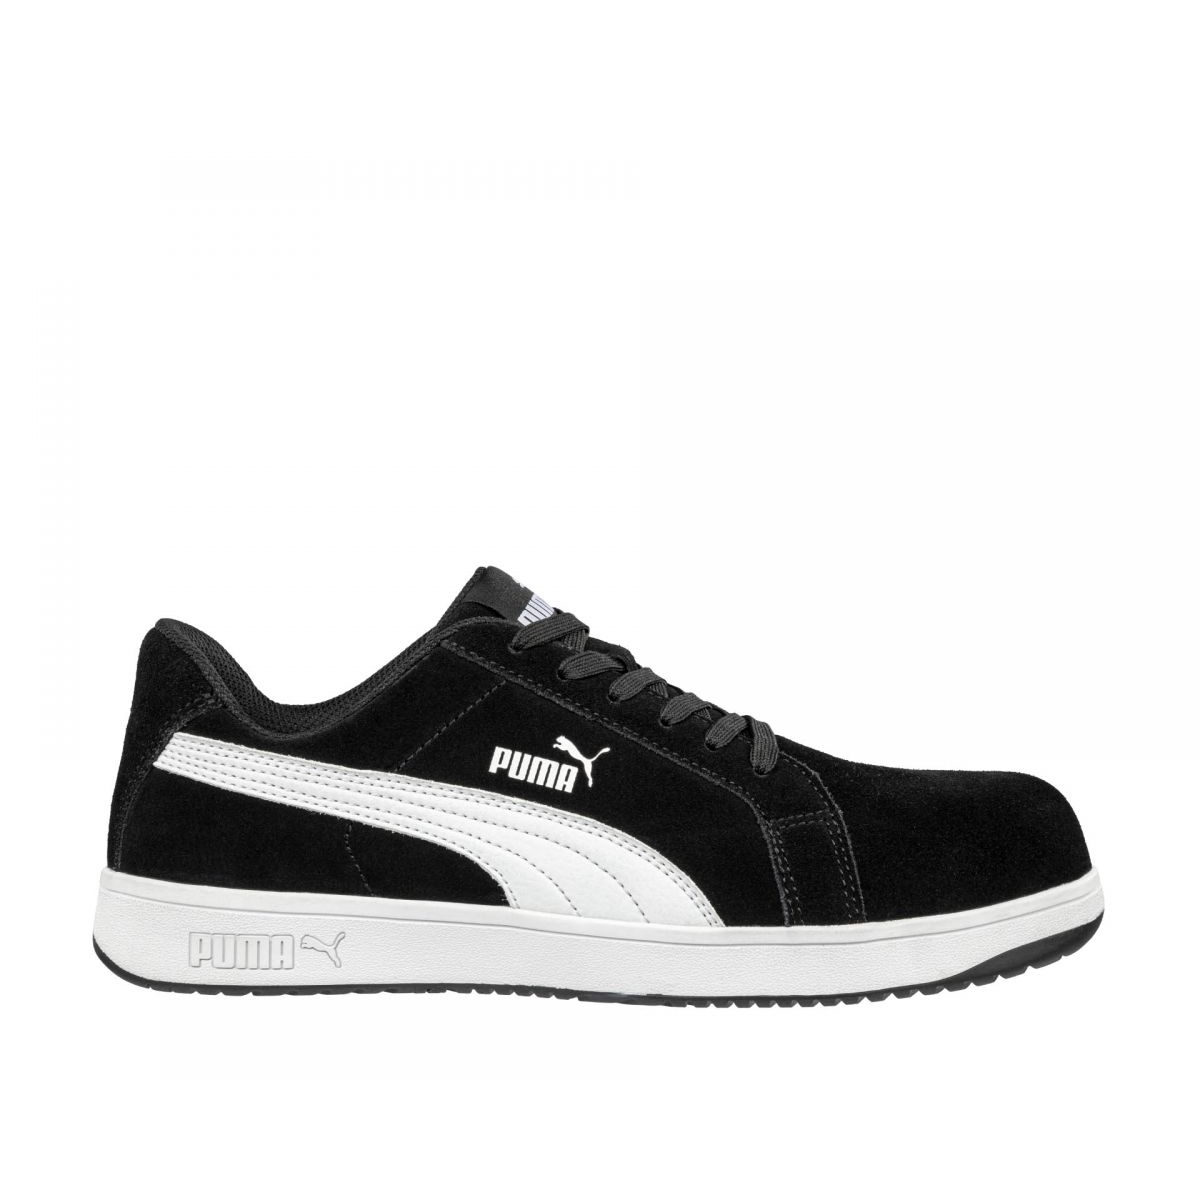 PUMA Safety Women's Iconic Low Composite Toe EH Work Shoes Black Suede - 640115 BLACK - BLACK, 9.5